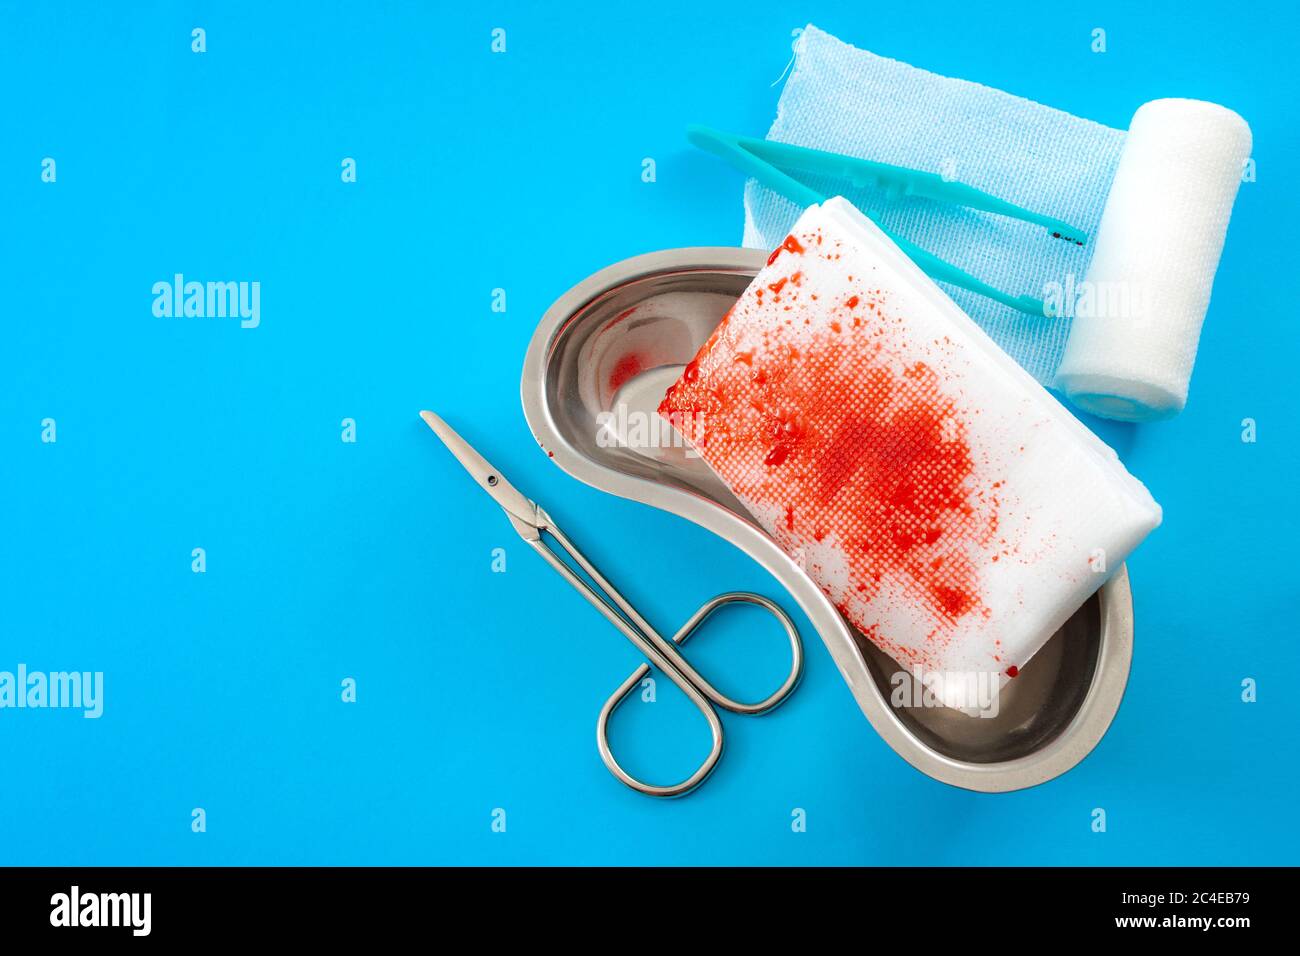 Medical waste, used surgery supplies and first aid concept with roll of gauze bandages, kidney dish, scissors and bloody used bandage covered in blood Stock Photo